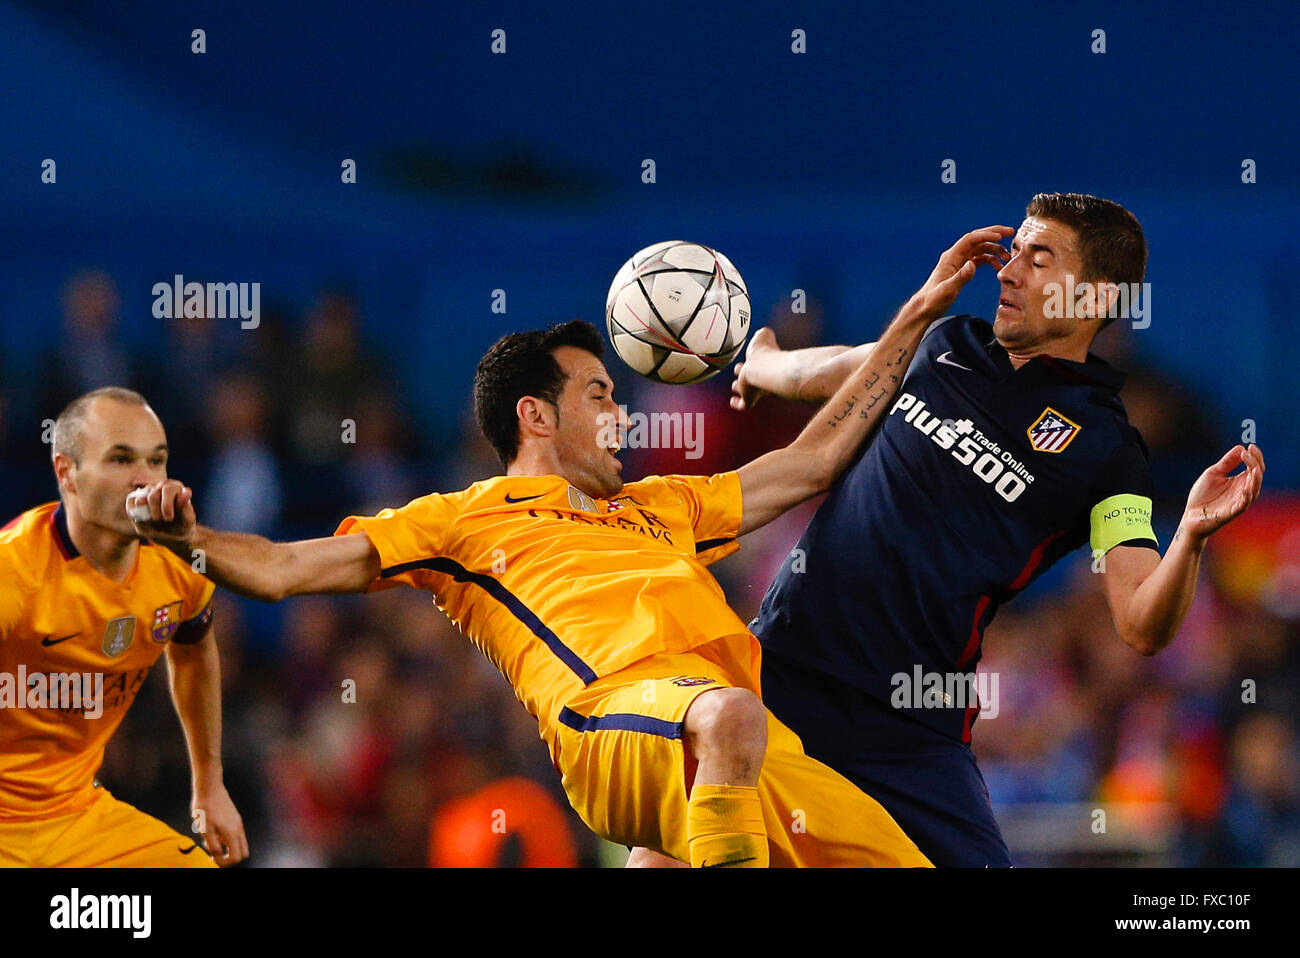 Madrid, Spain. 13th Apr, 2016. Sergio Busquets i Burgos (5) FC Barcelona and Grabiel Fenandez Arenas (14) Atletico de Madrid. UCL Champions League between Atletico de Madrid and FC Barcelona at the Vicente Calderon stadium in Madrid, Spain, April 13, 2016 . © Action Plus Sports/Alamy Live News Stock Photo